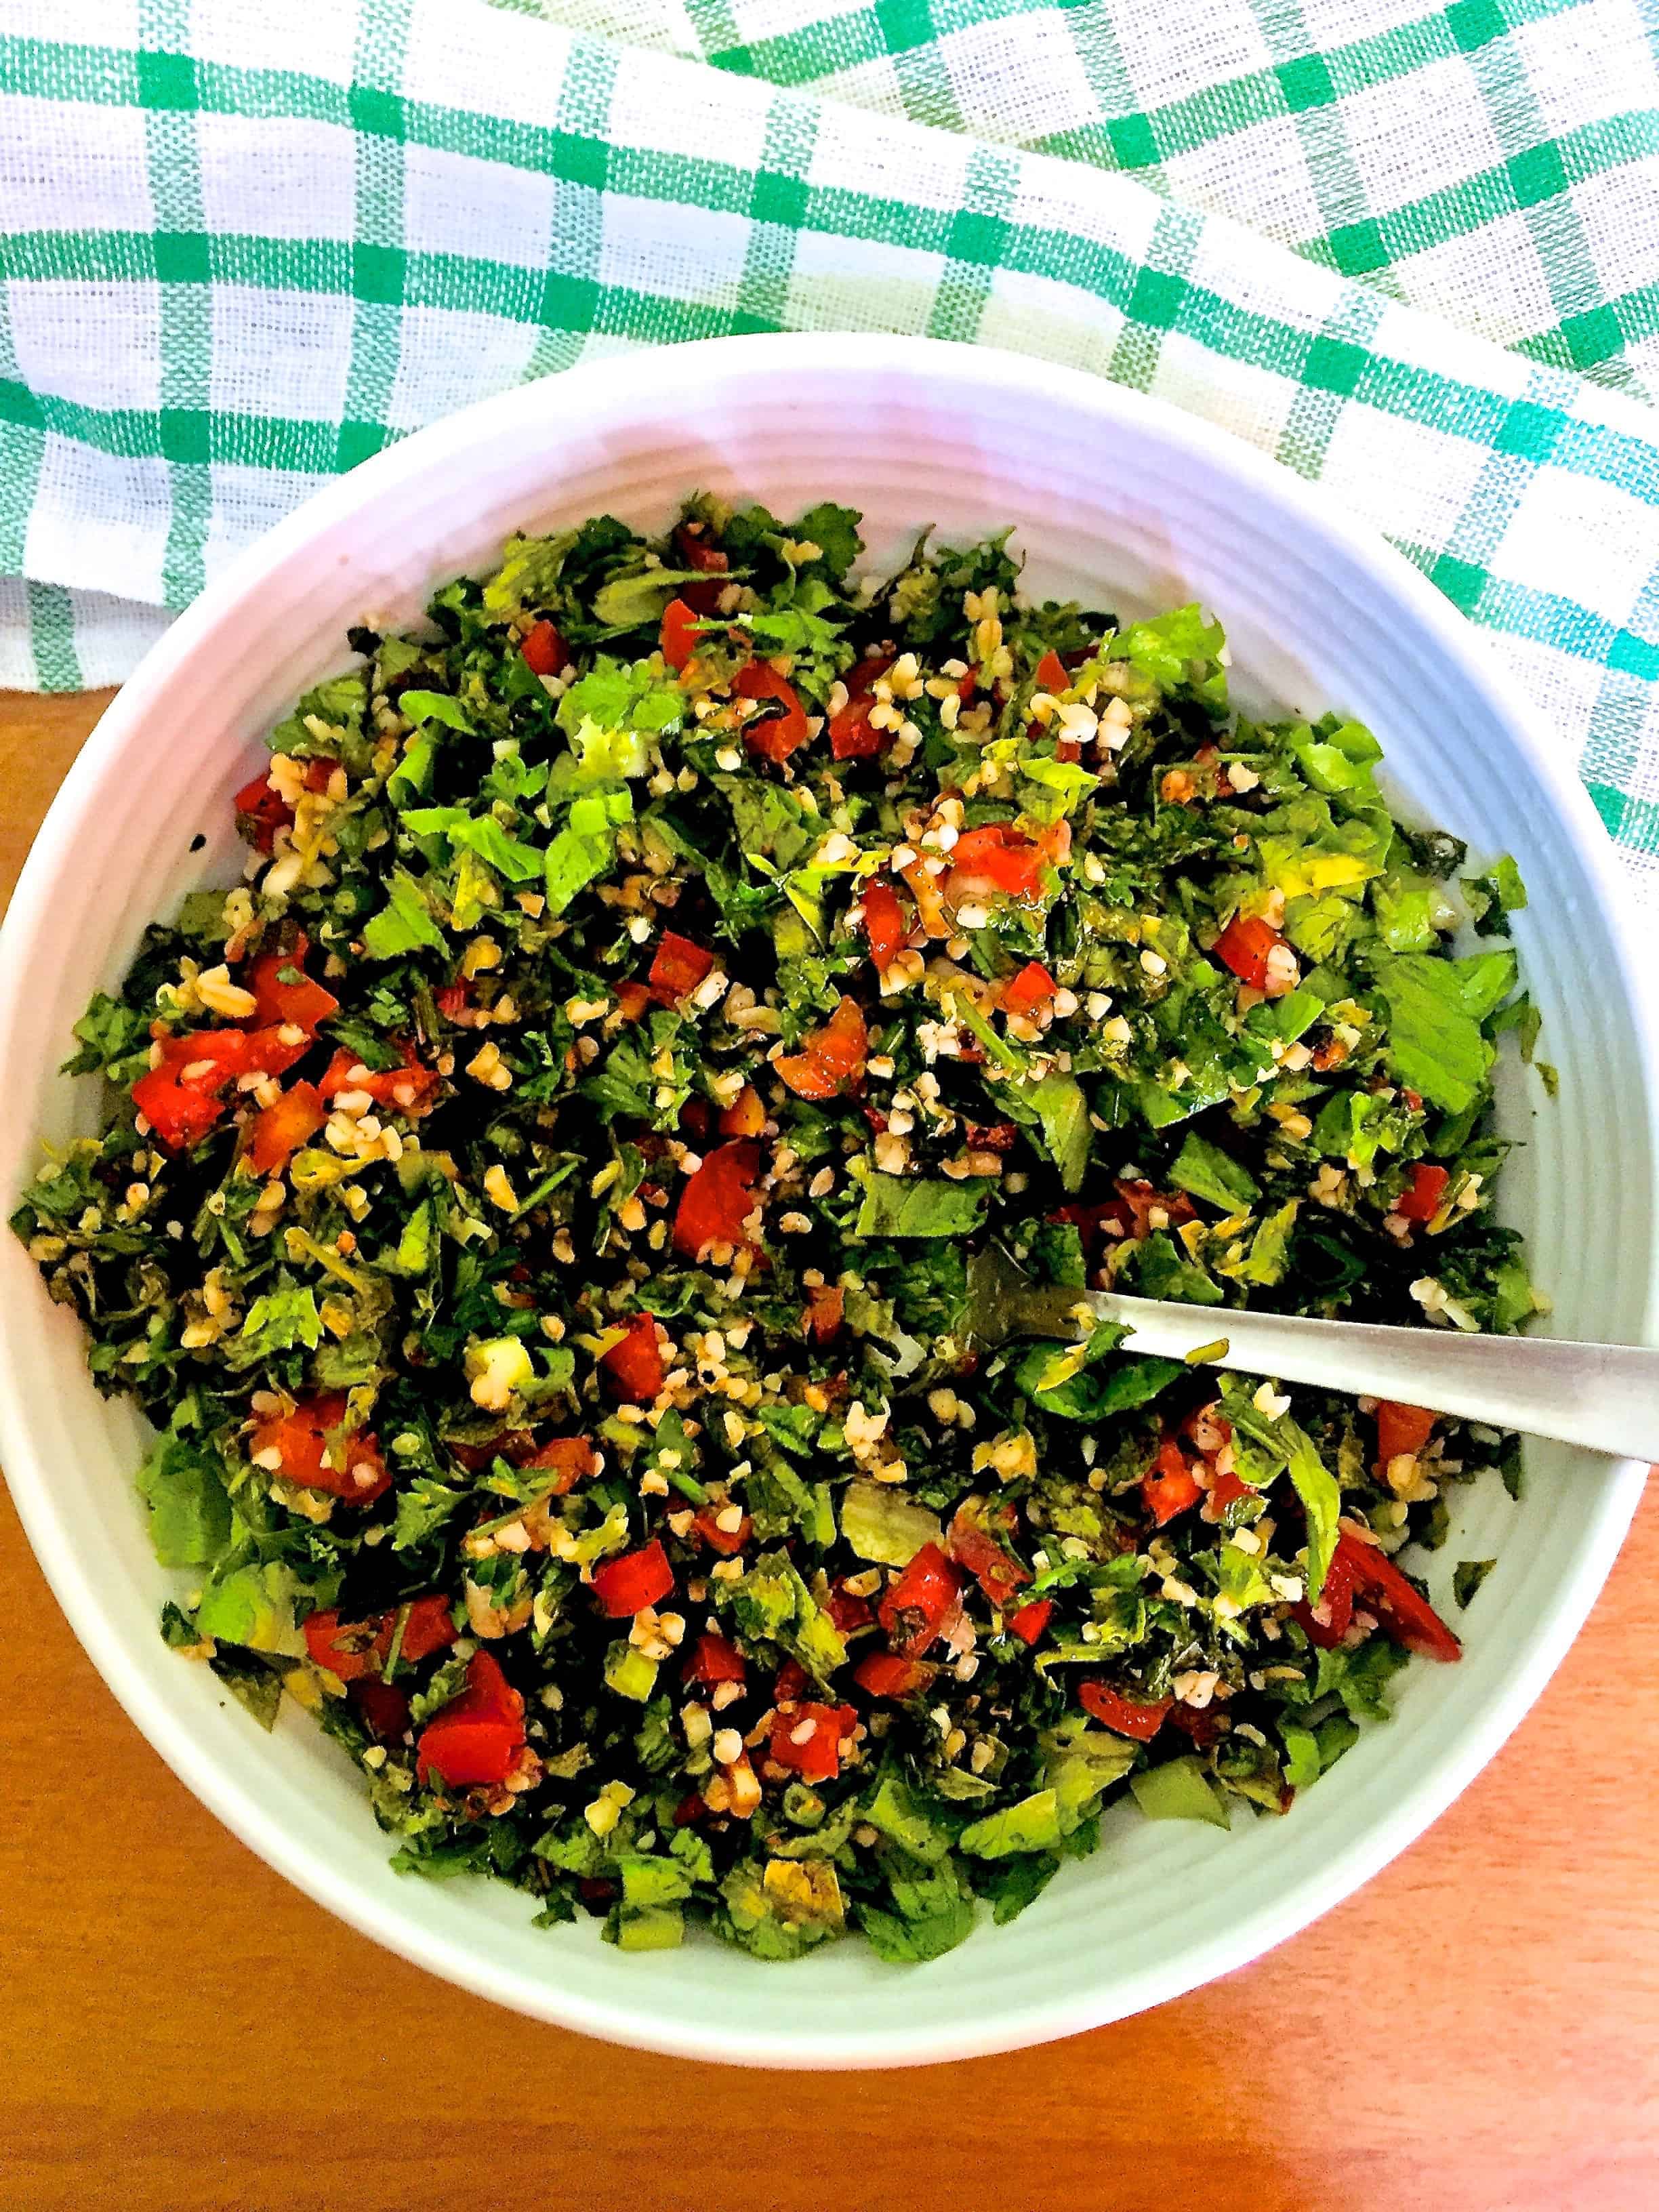 Red and green colourful Levantine Tabbouleh in a white bowl with a green and white checked napkin on an orange background. Finely chopped Green flat leaf parsely, red tomatoes, white creamy bulgar, green romaine lettuce